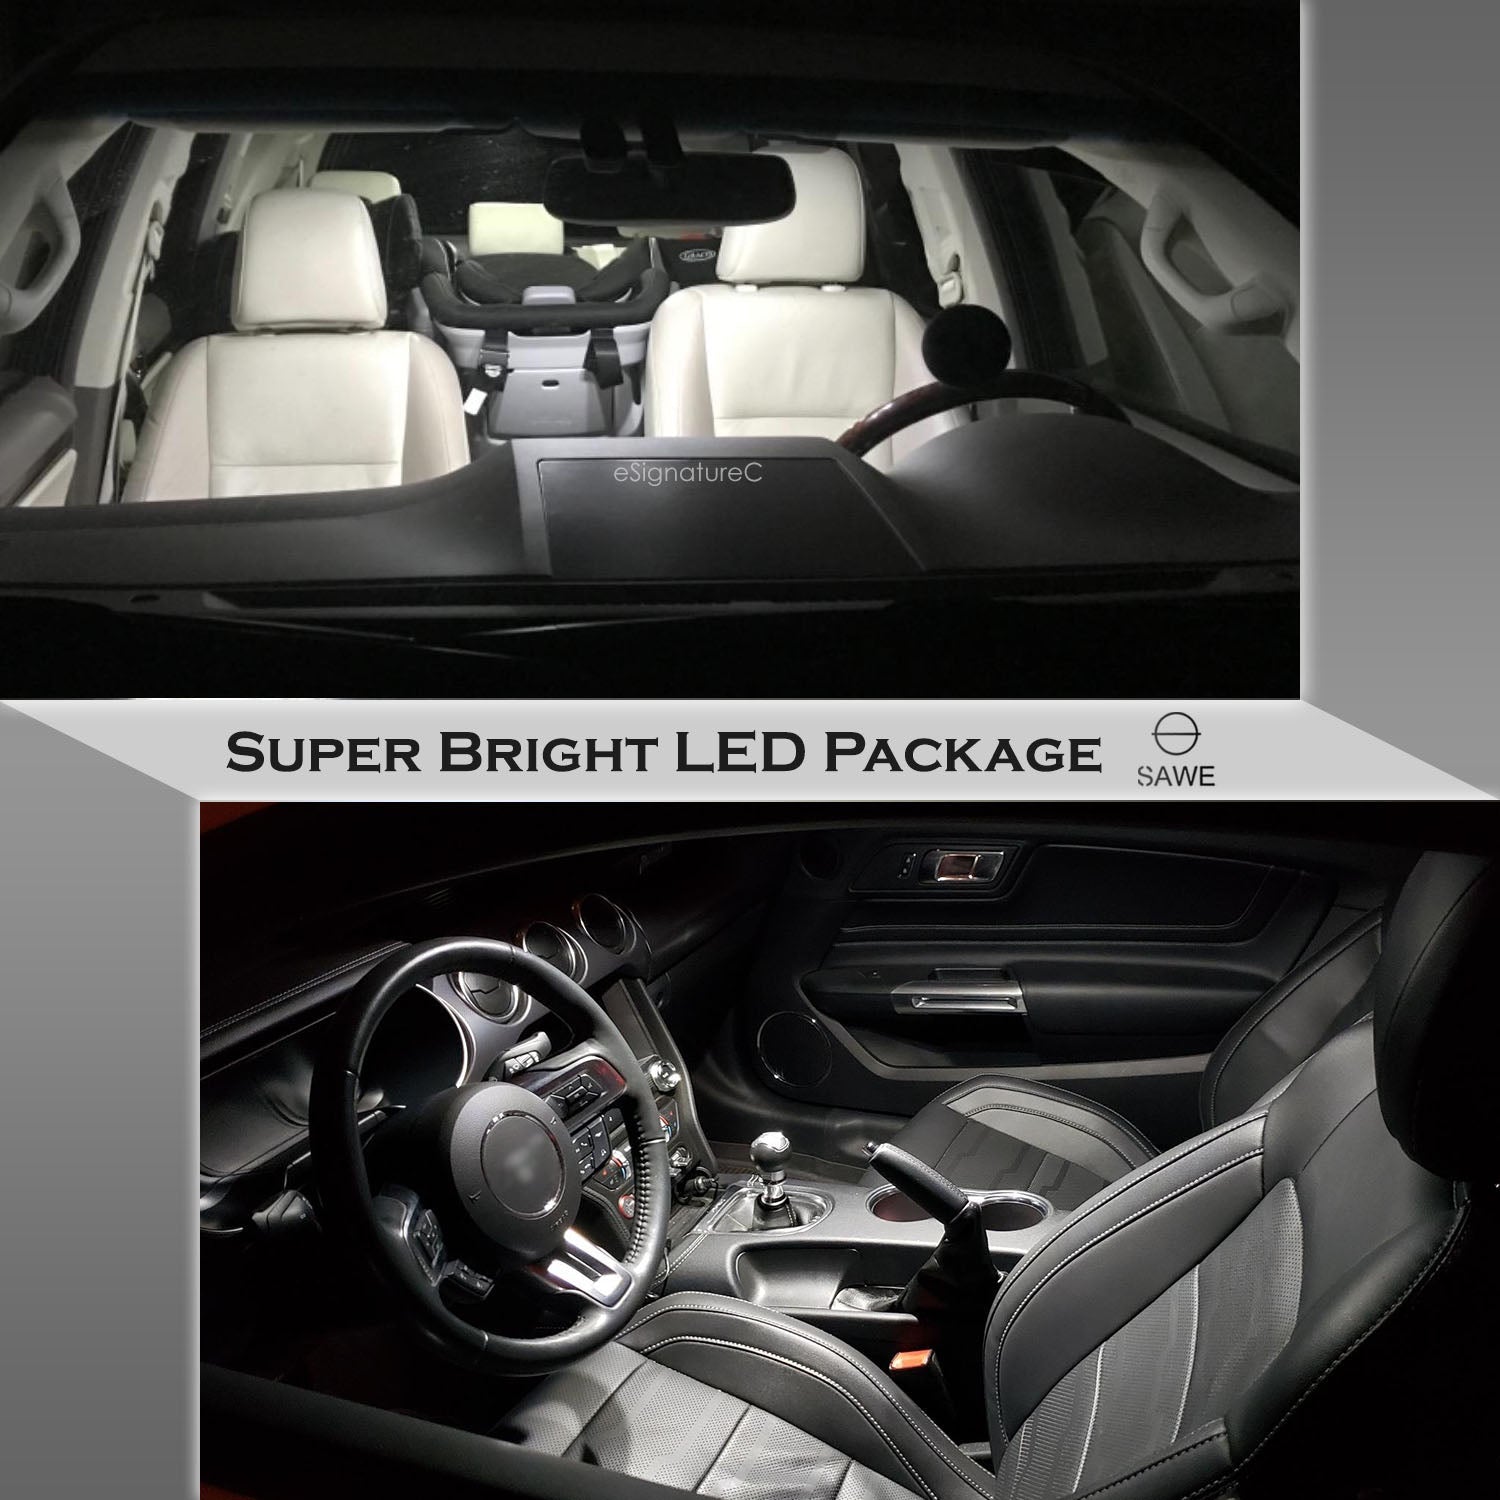 For Audi A6 RS6 Interior LED Lights - Dome & Map Light Bulb Package Kit for 1998 - 2004 - White